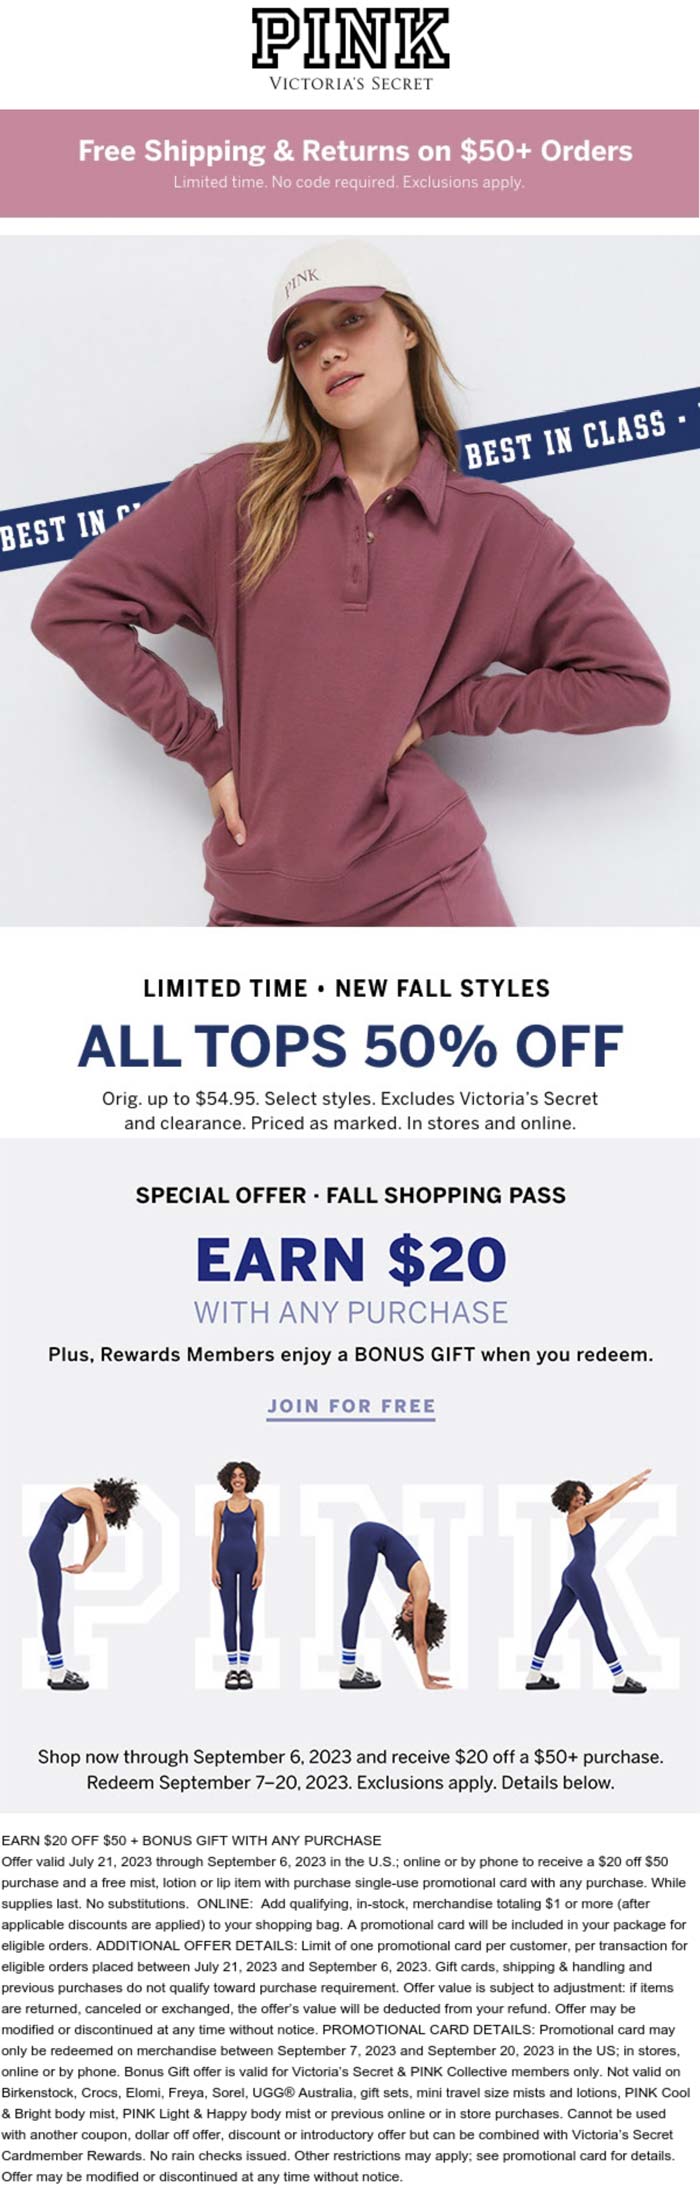 PINK stores Coupon  All tops 50% off at PINK, ditto online #pink 